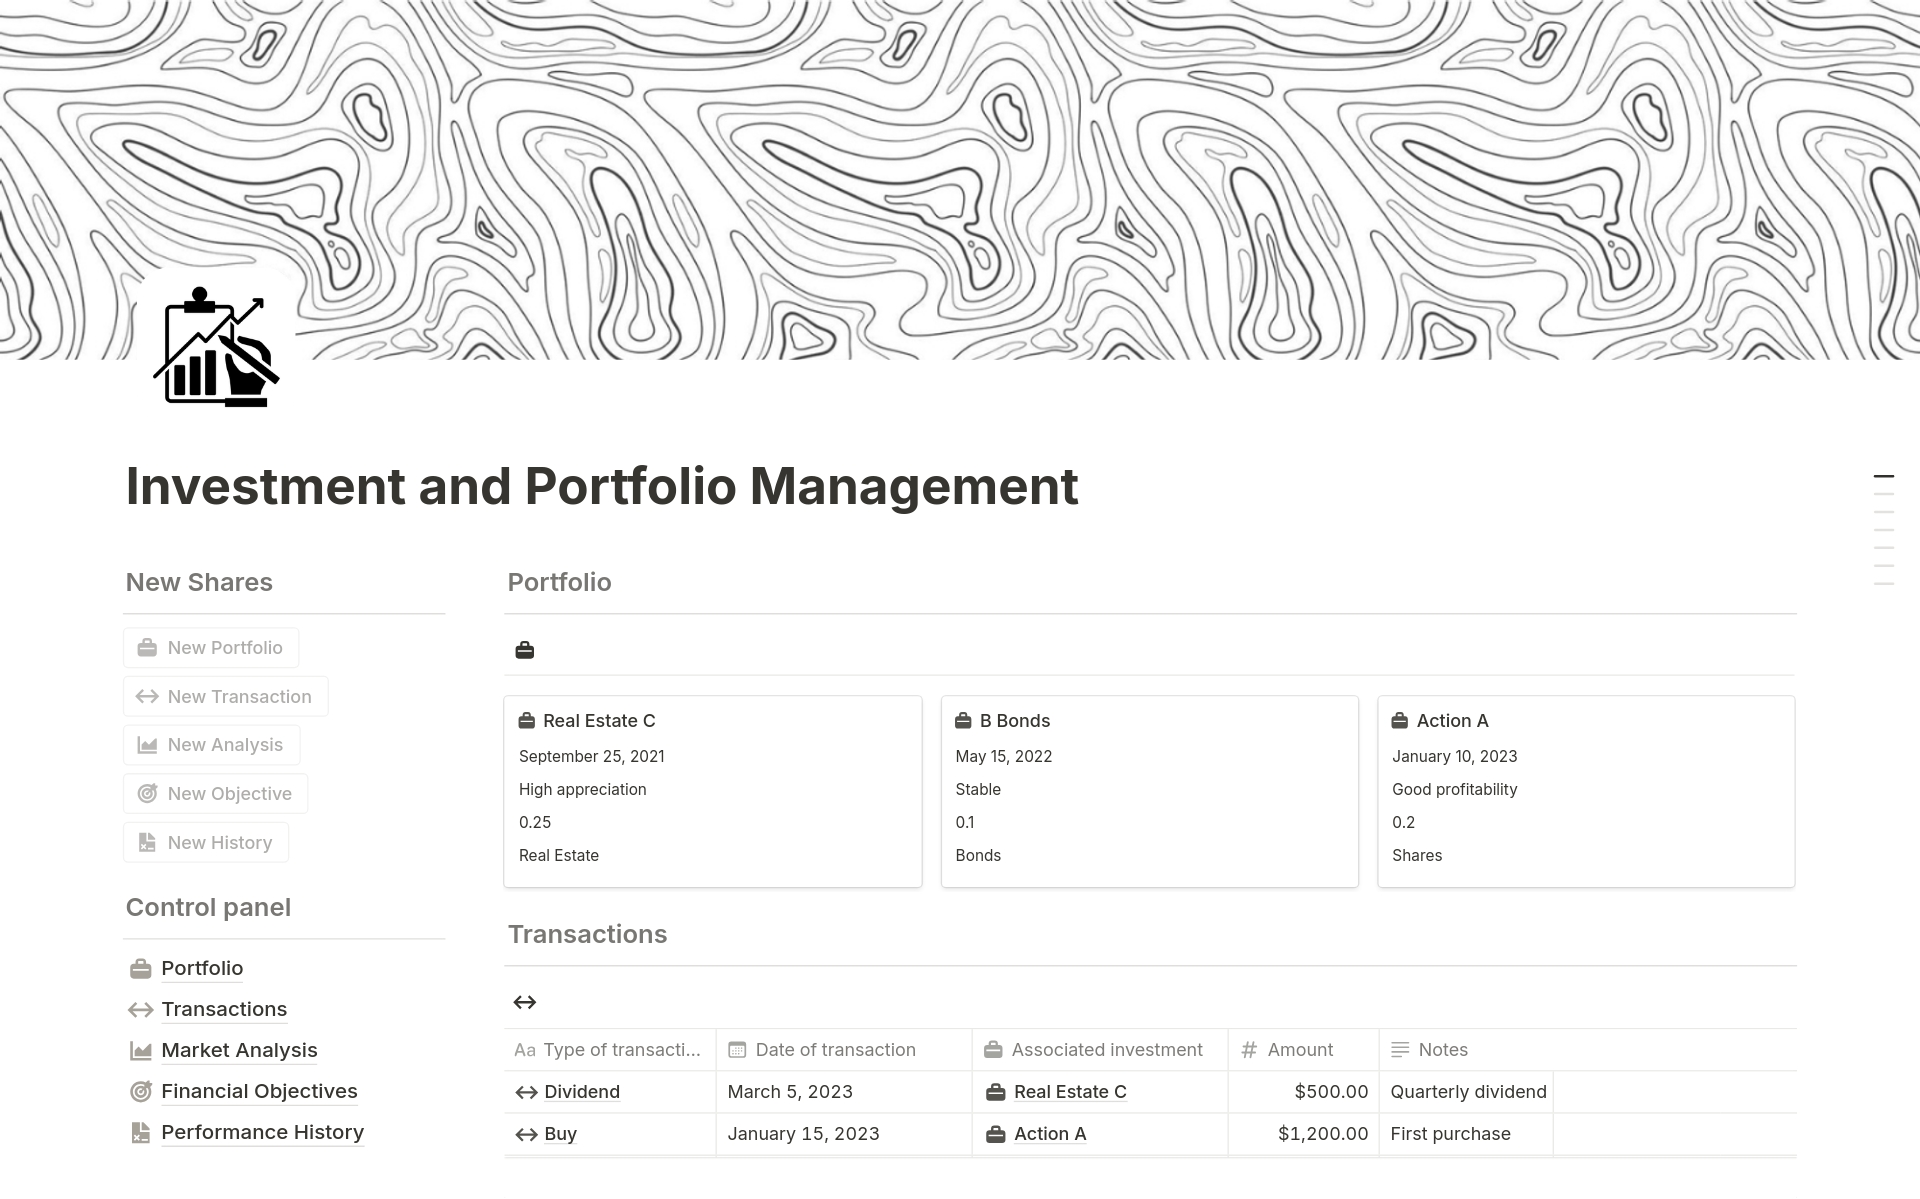 Optimize your investments with our Investment and Portfolio Management template in Notion. Ideal for investors of all levels.